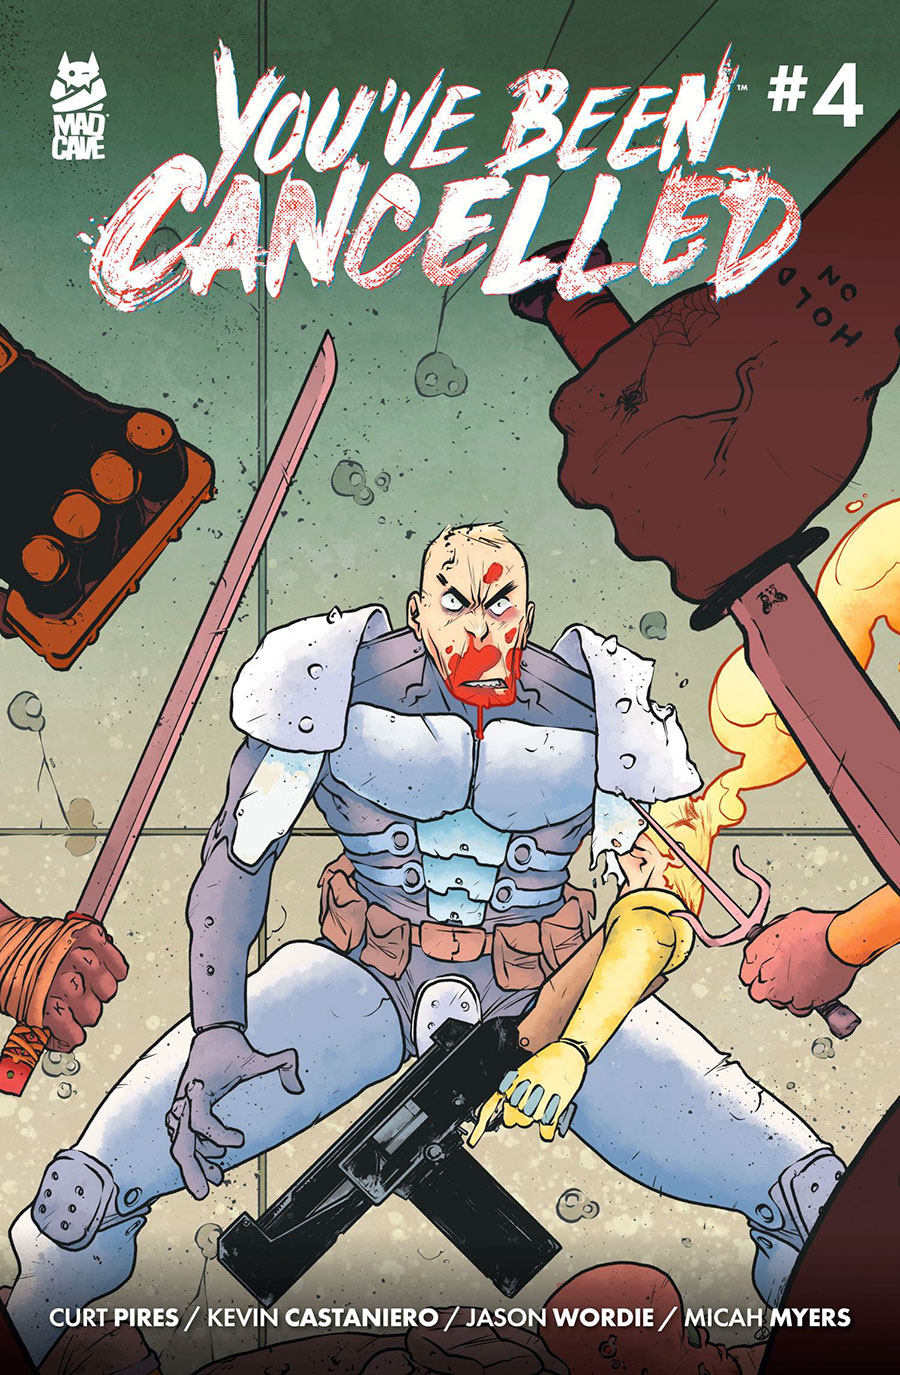 Youve Been Cancelled #4